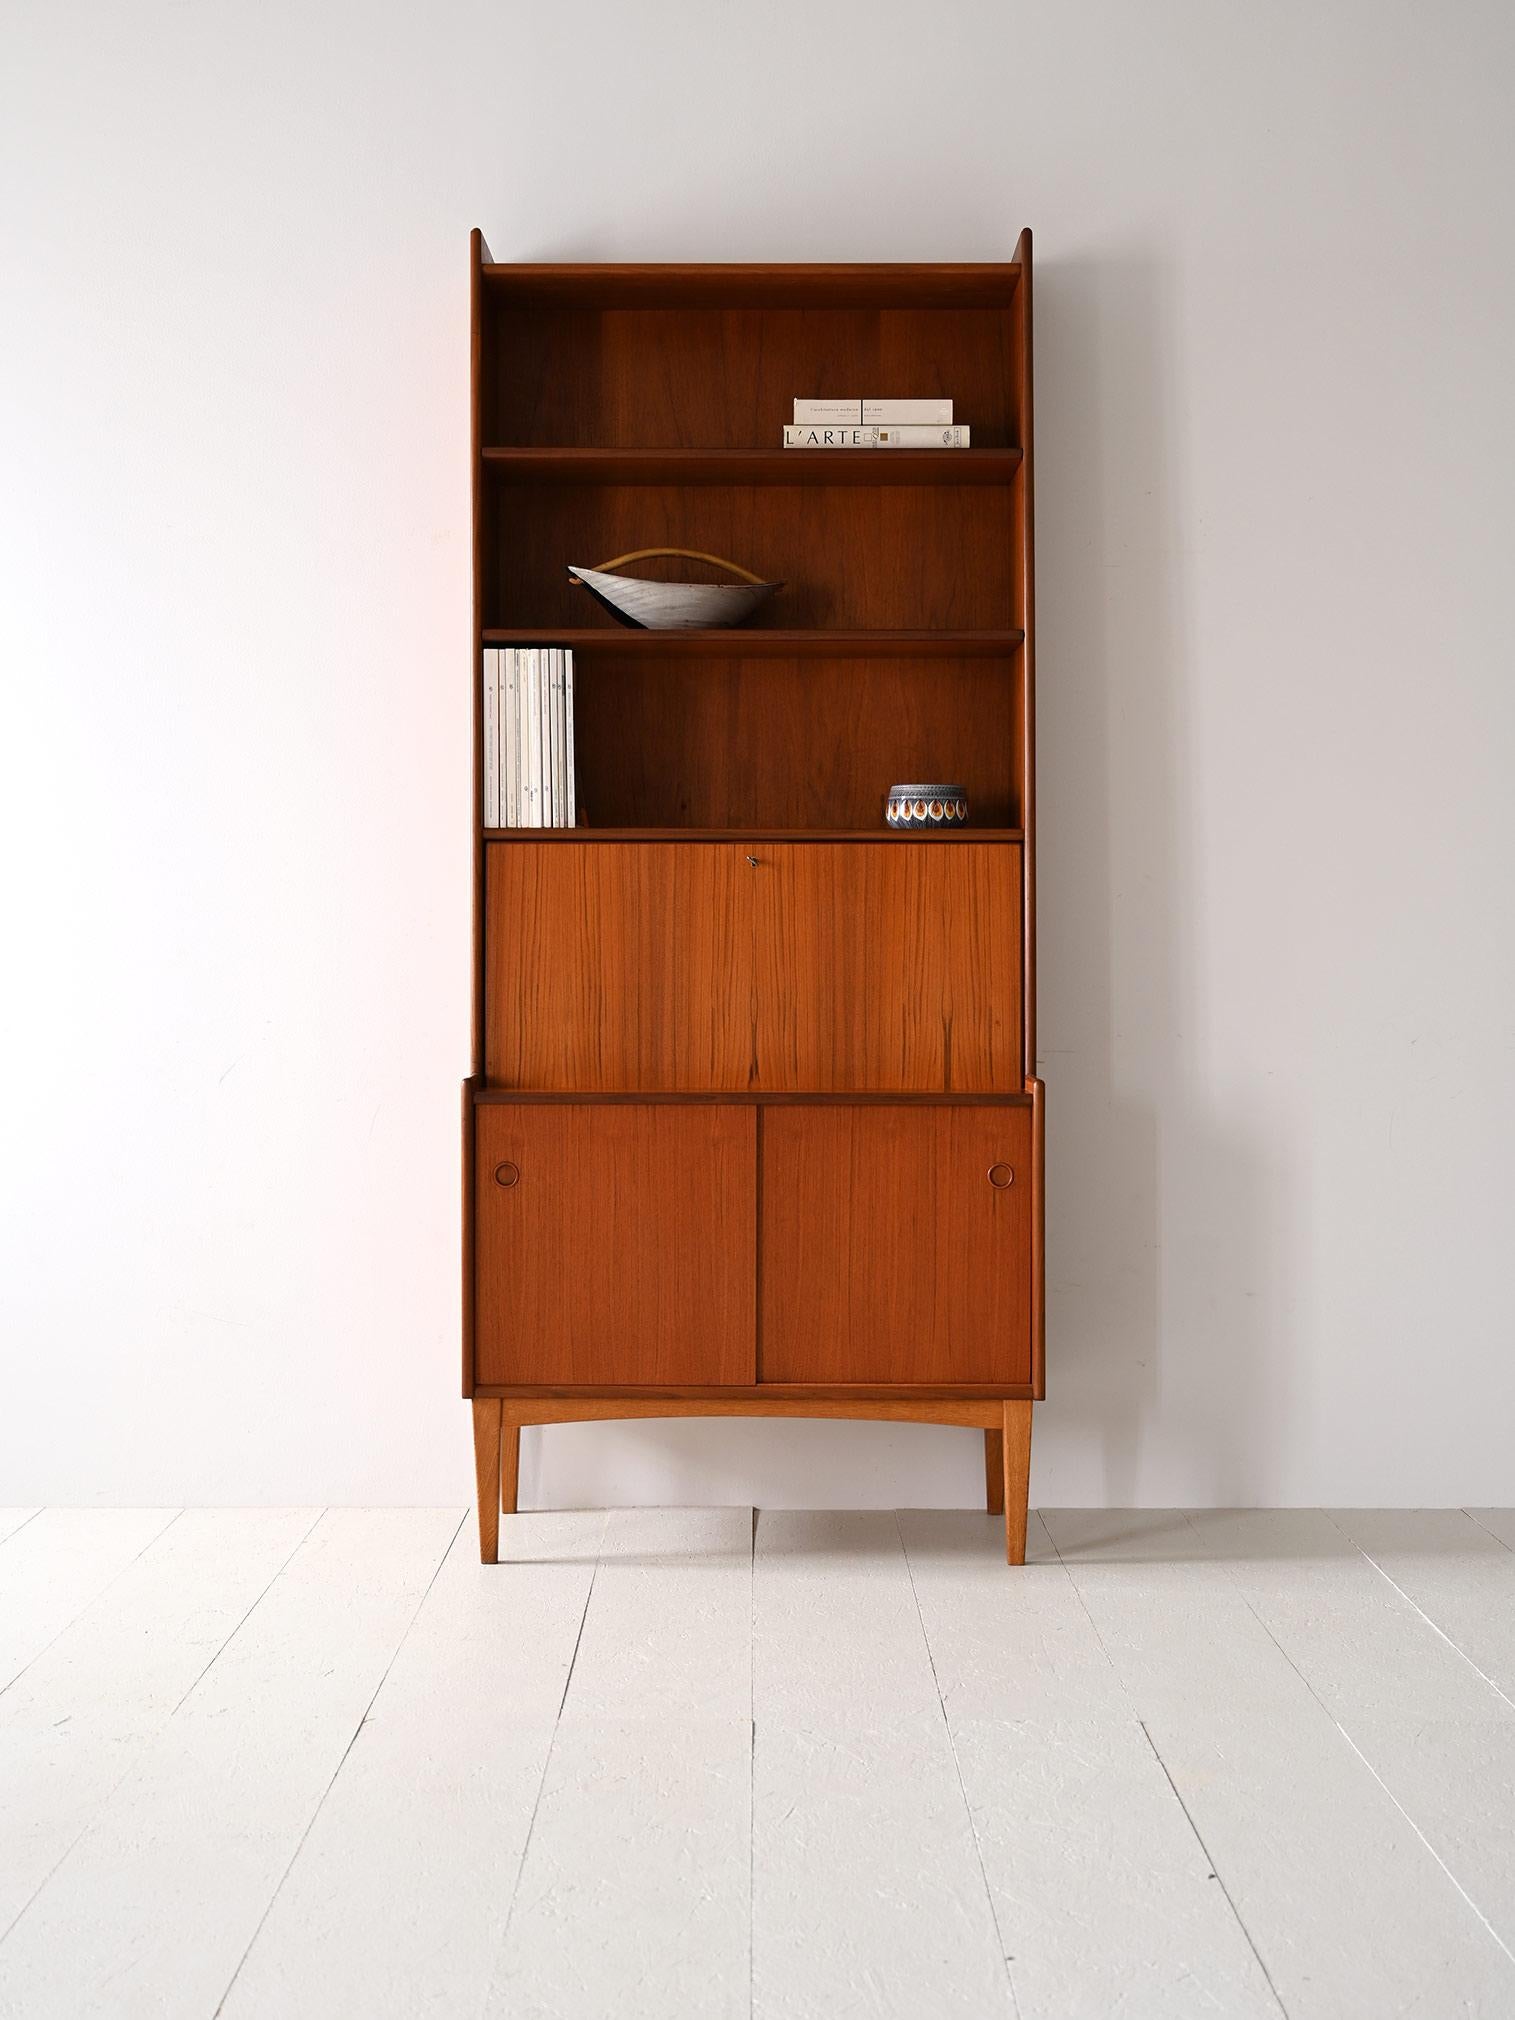 1960s teak cabinet with flap and shelves.

Particular piece of vintage furniture consisting of a frame whose lower part has a storage compartment with sliding doors while the upper part has two shelves and a compartment with a flap.
A functional